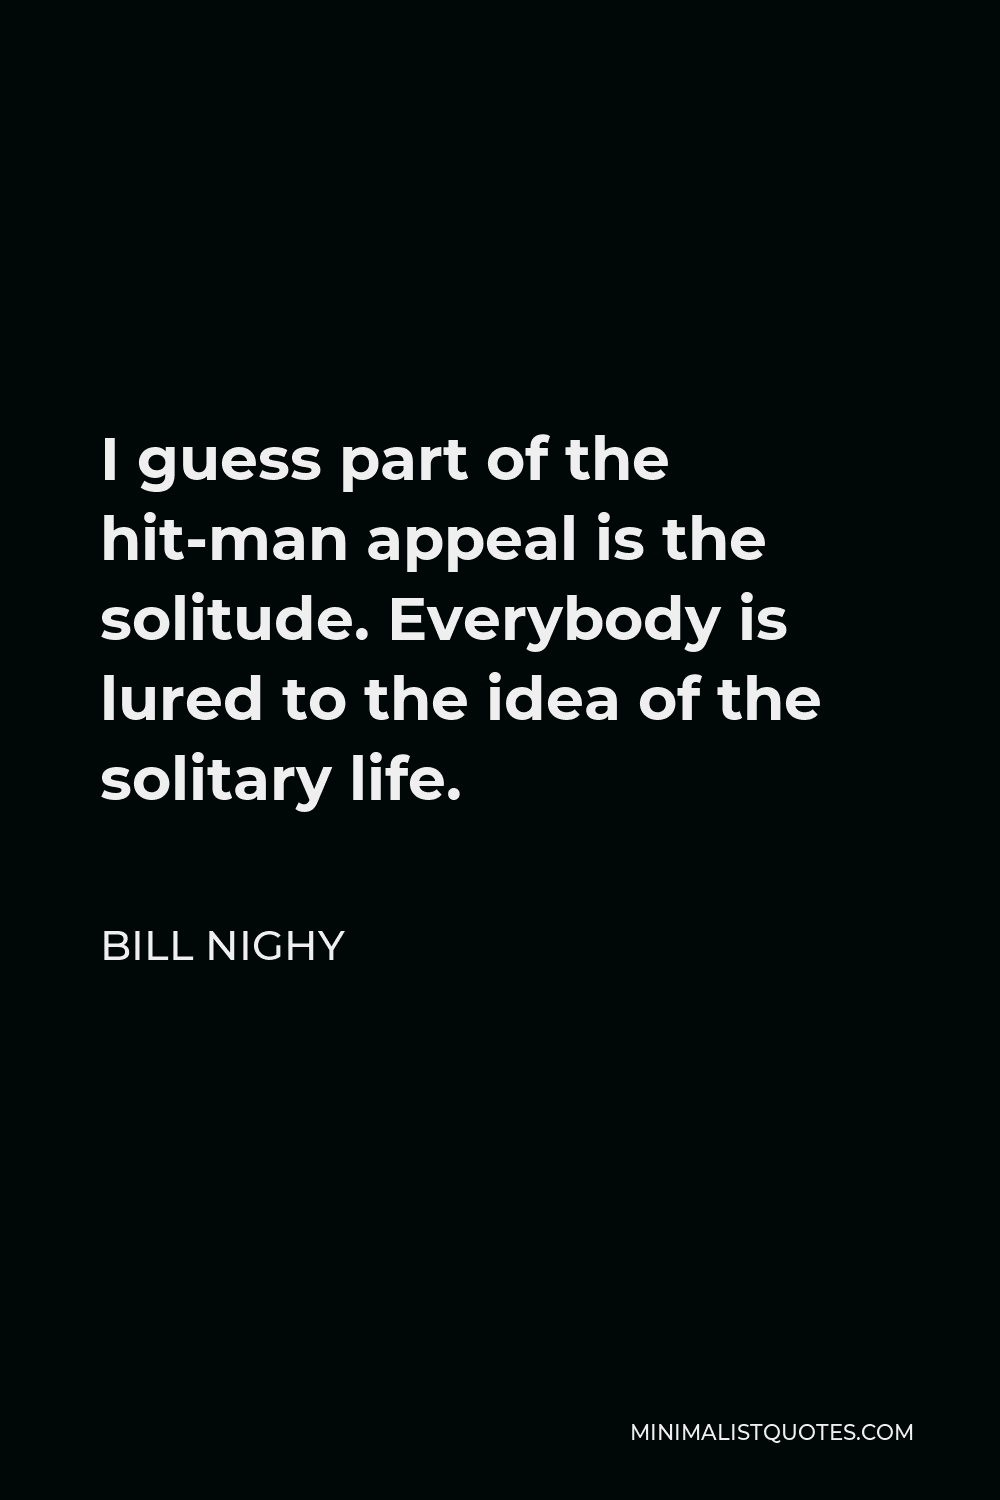 Bill Nighy Quote - I guess part of the hit-man appeal is the solitude. Everybody is lured to the idea of the solitary life.